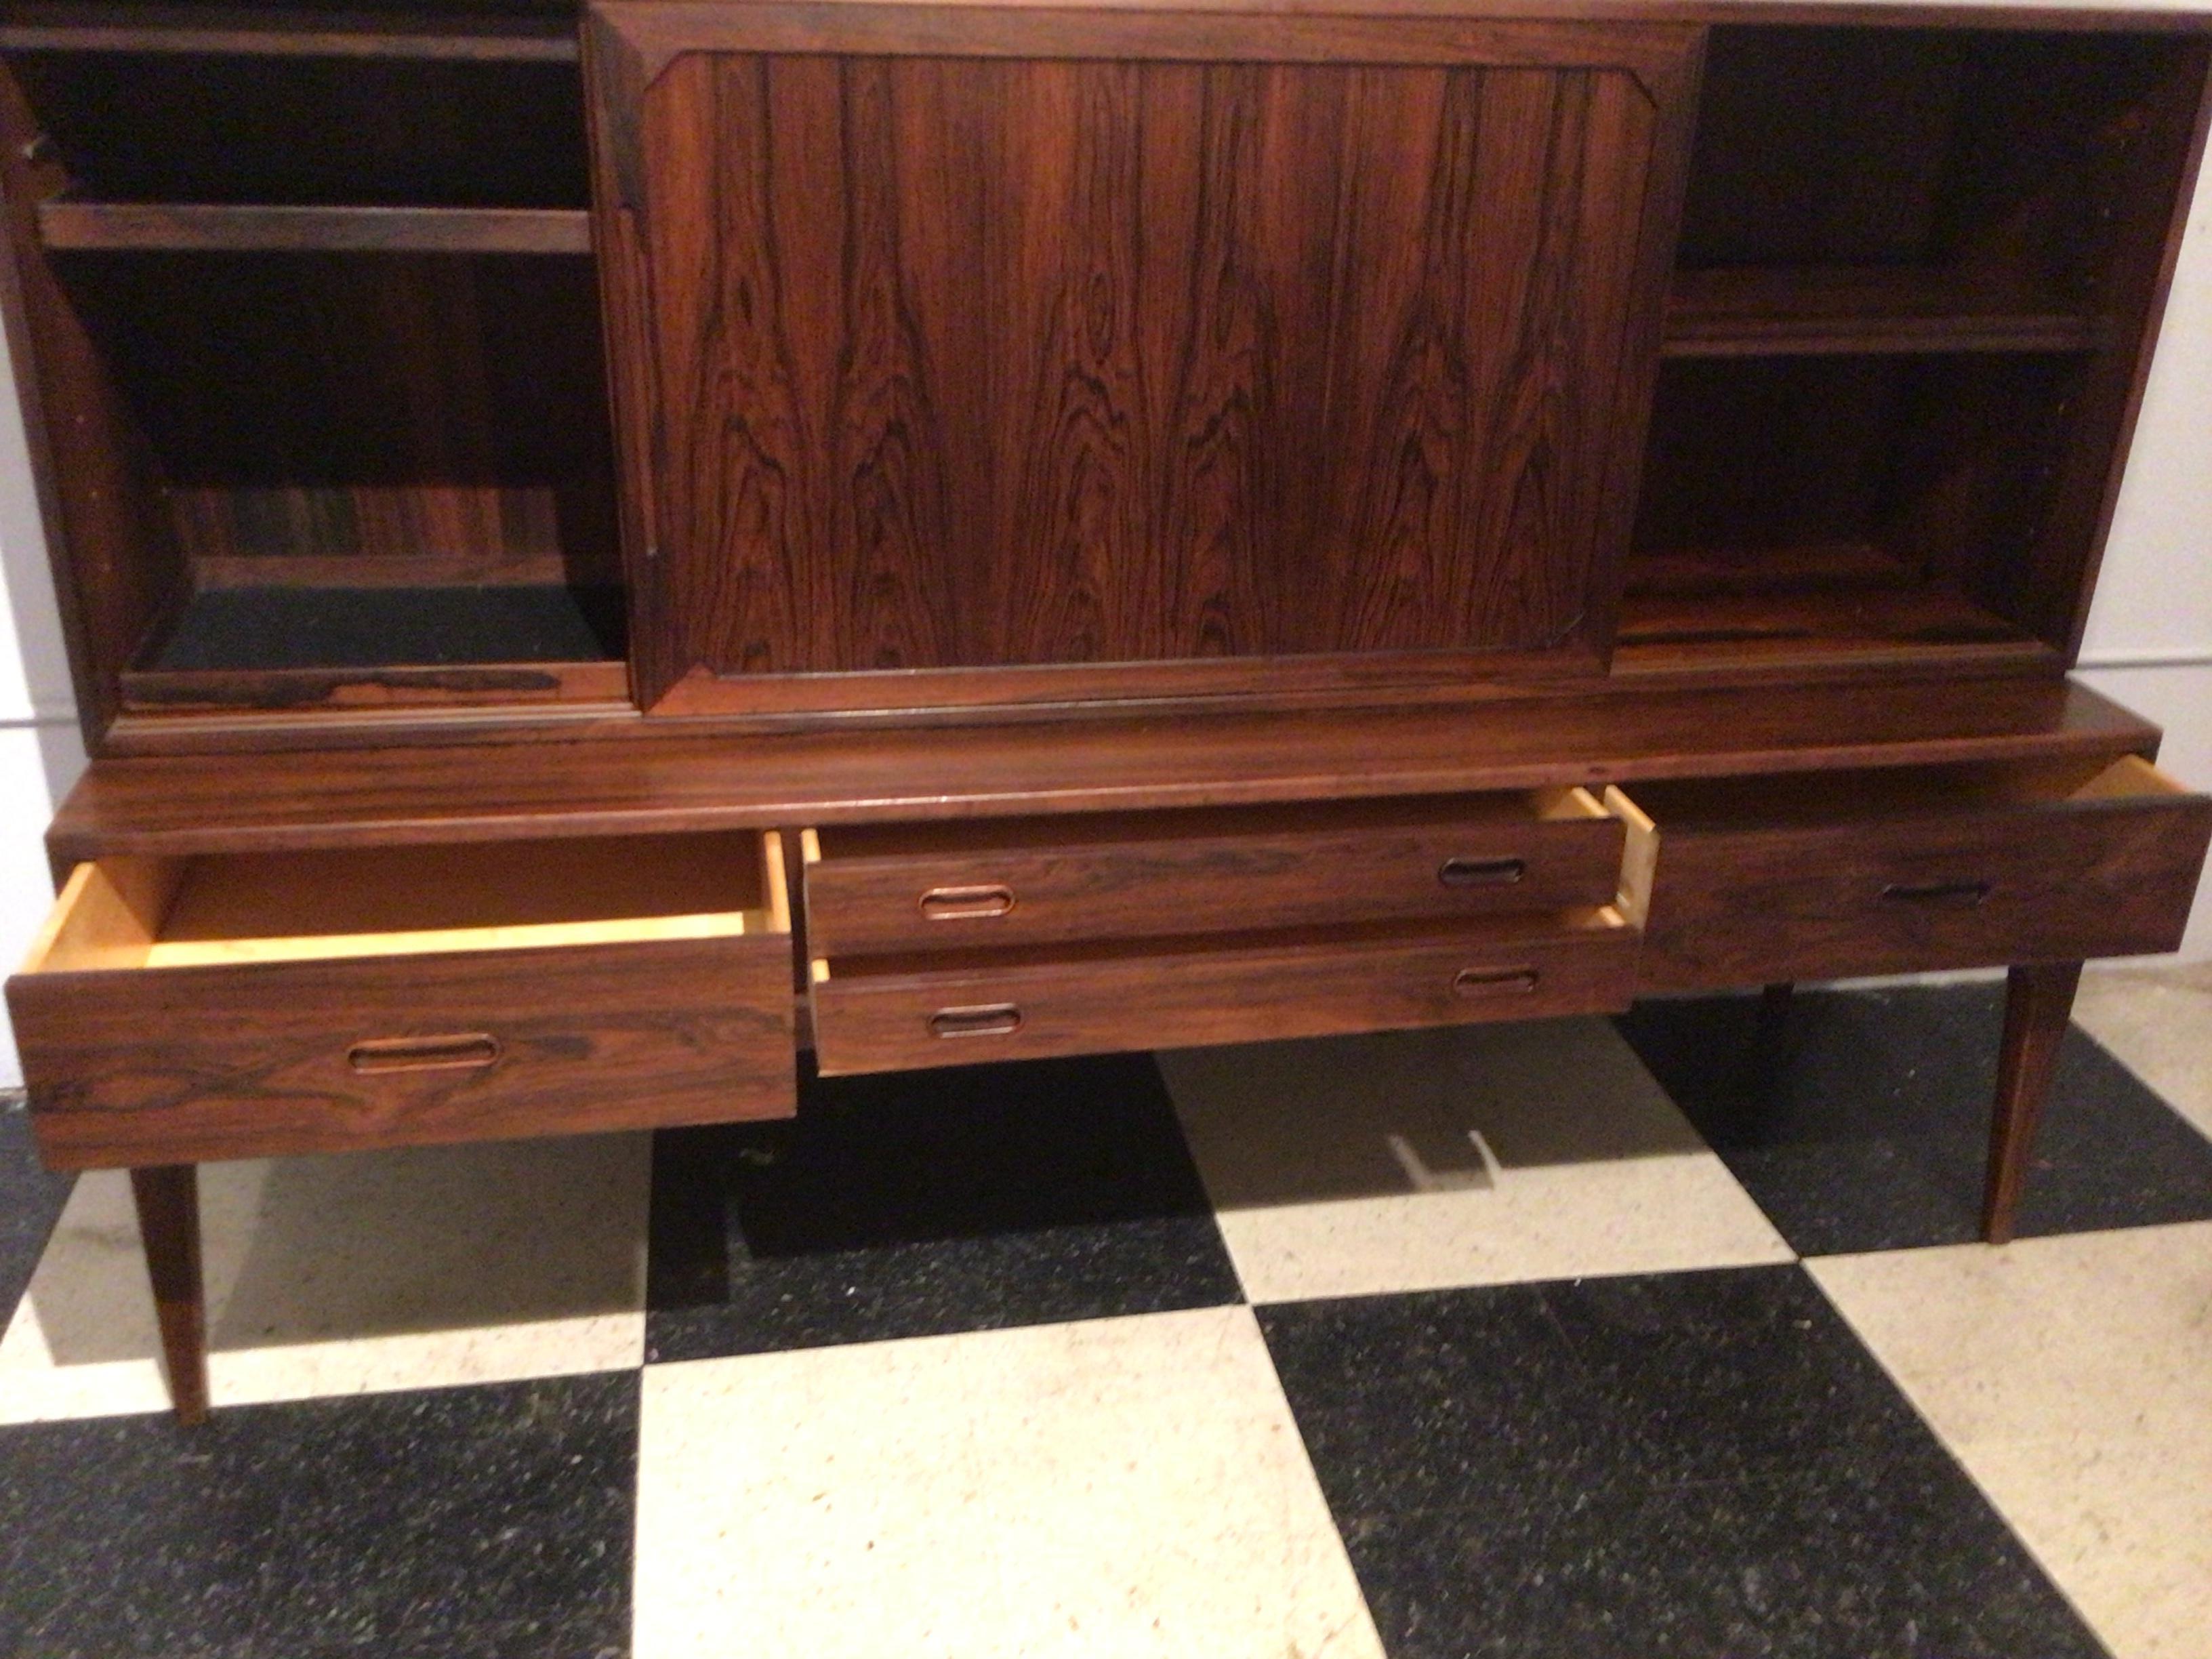 1960s Schou Anderson Mobelfabrik Rosewood Credenza / Bookcase In Good Condition For Sale In Tarrytown, NY